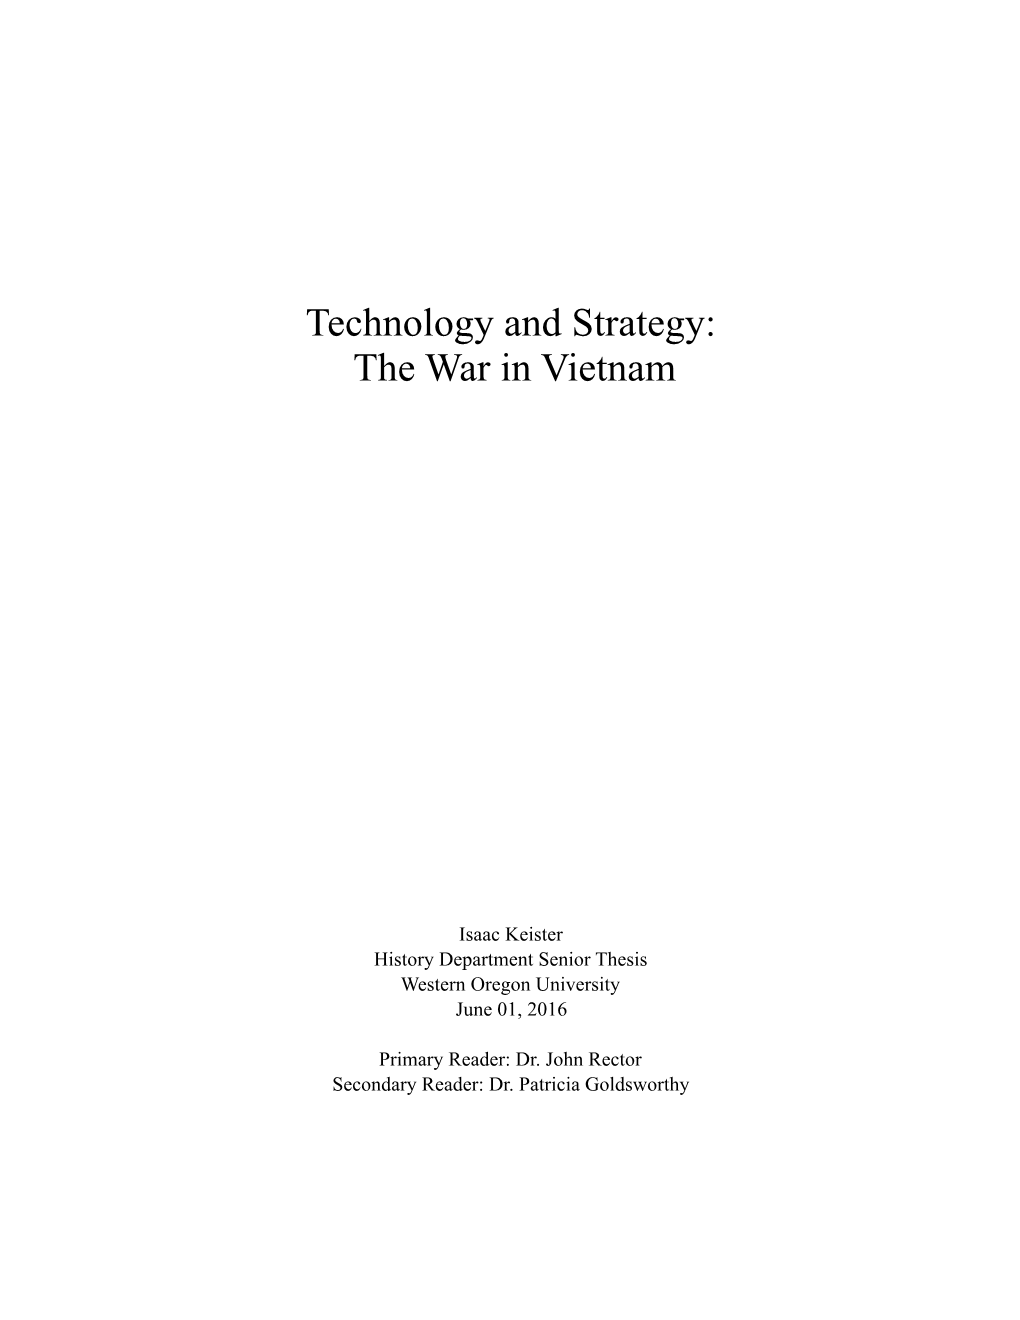 Technology and Strategy: the War in Vietnam